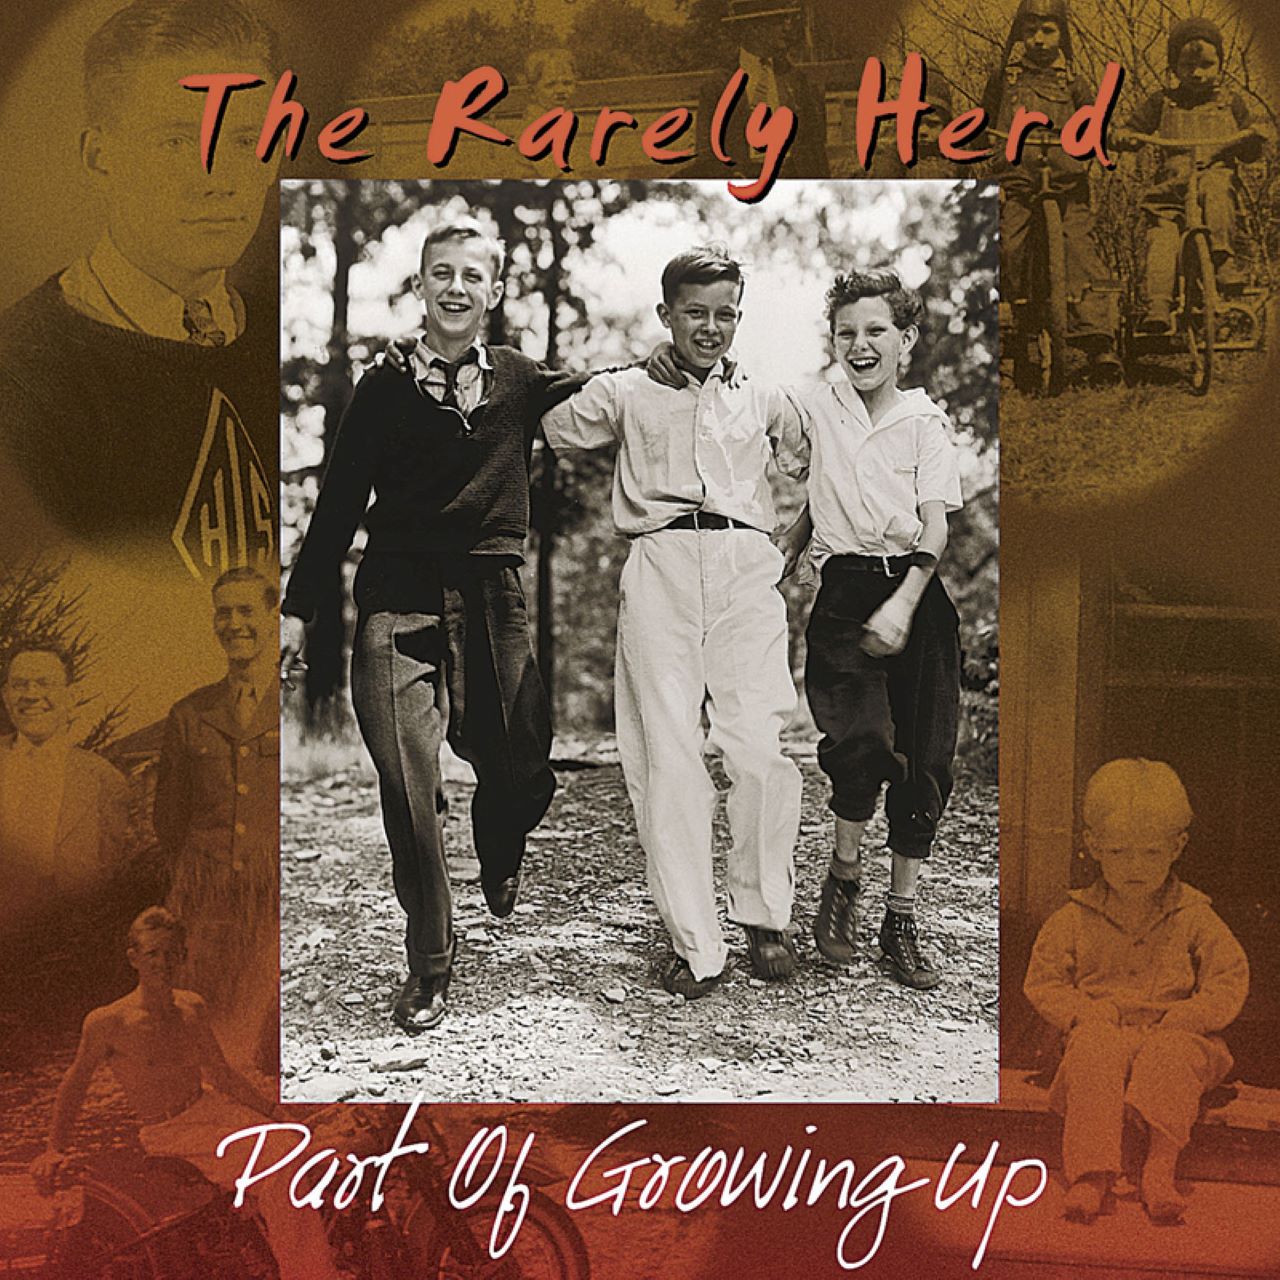 Rarely Herd - Part Of Growing Up cover album